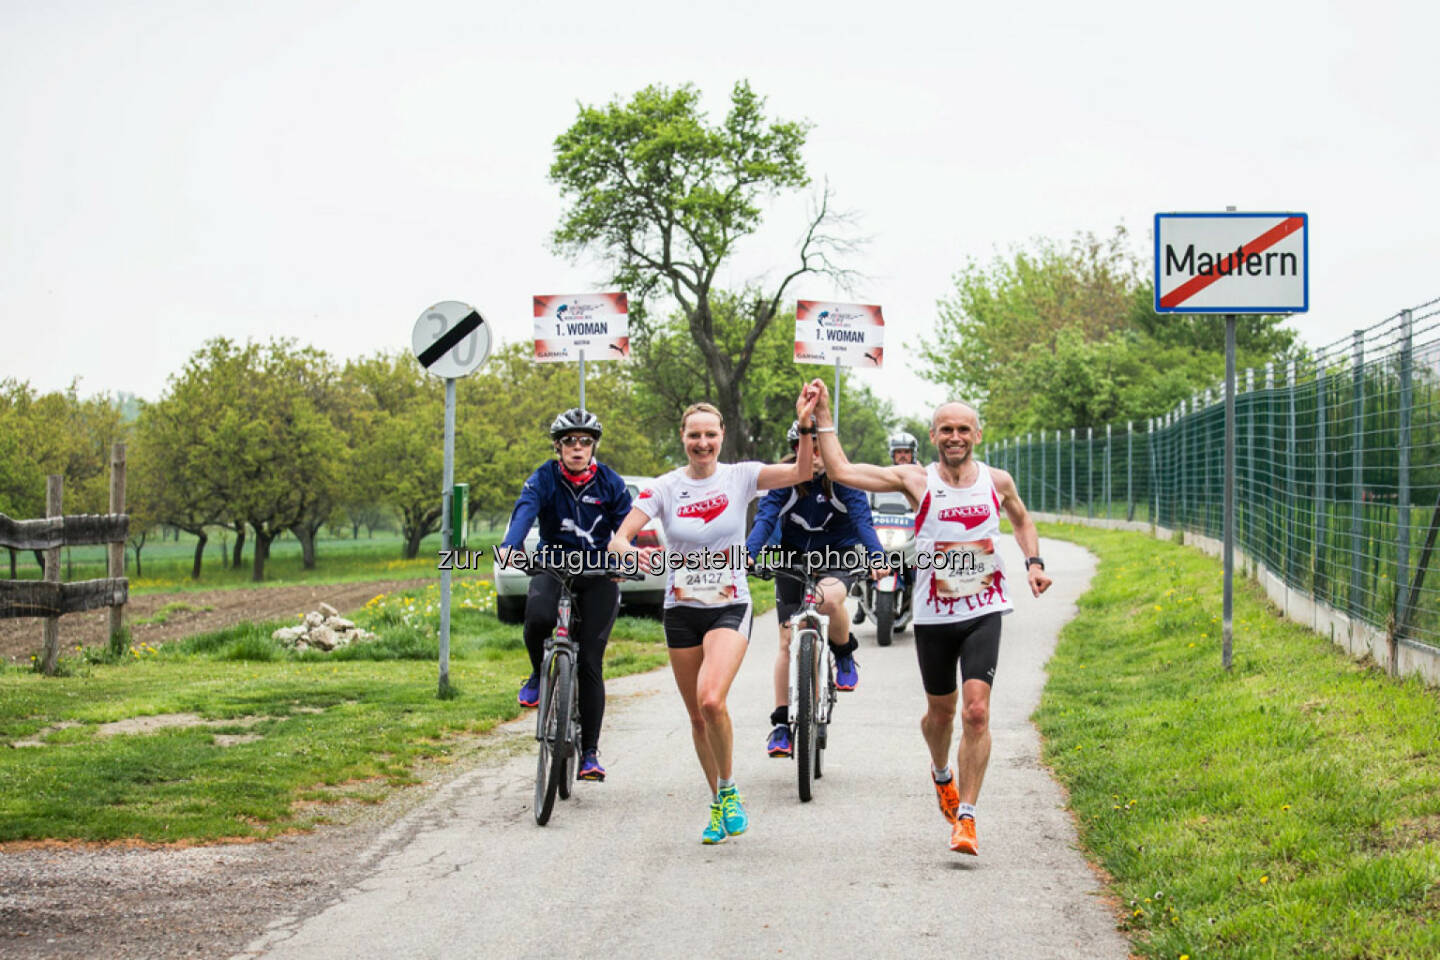 Participants perform at the Wings for Life World Run in St. Poelten, Austria on May, 3rd 2015. // Philipp Greindl for Wings for Life World Run // Please go to www.redbullcontentpool.com for further information. // 